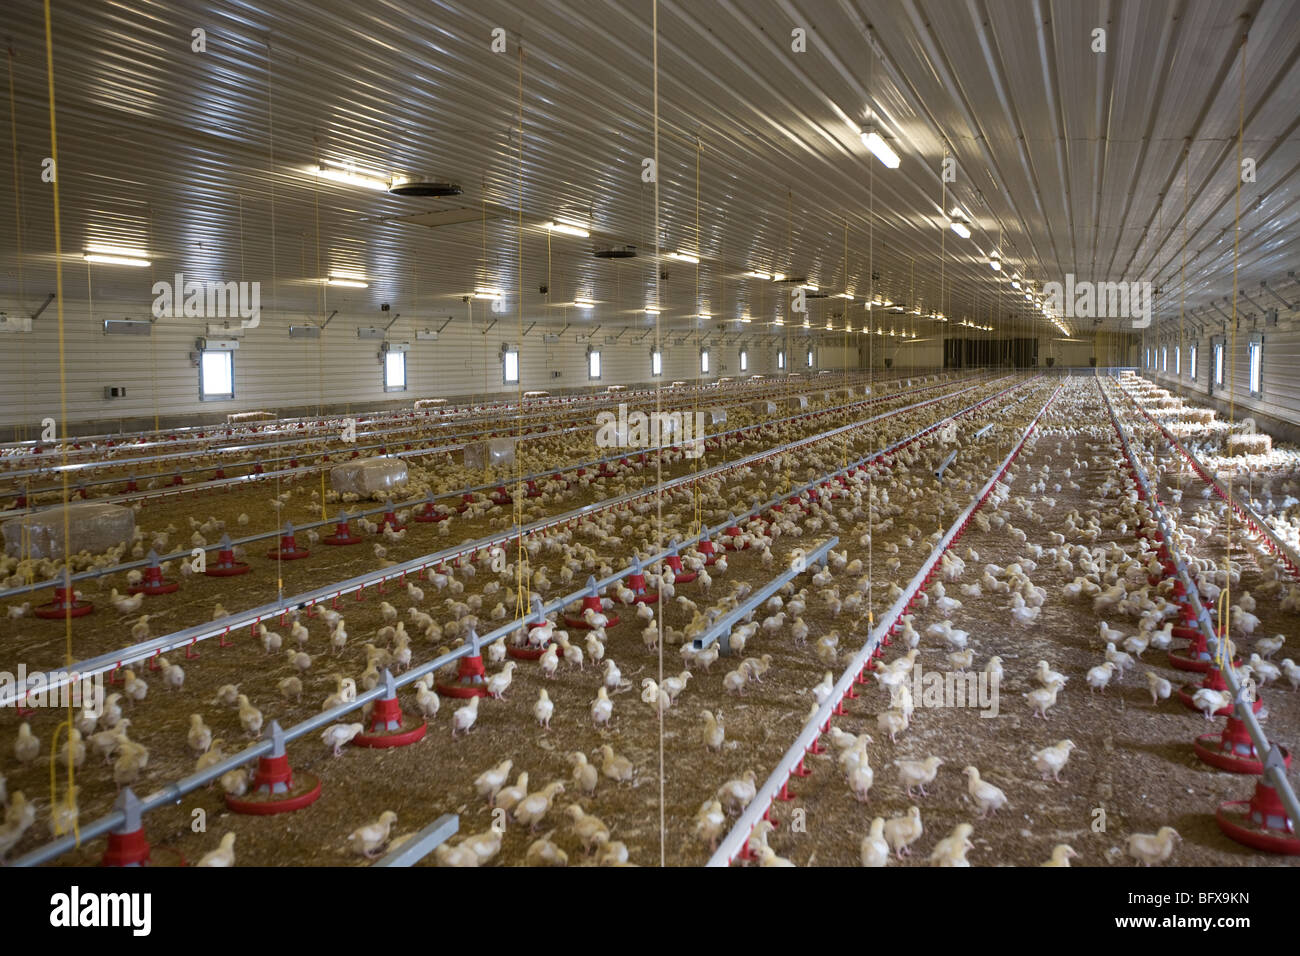 Inside a Chicken Shed Stock Photo